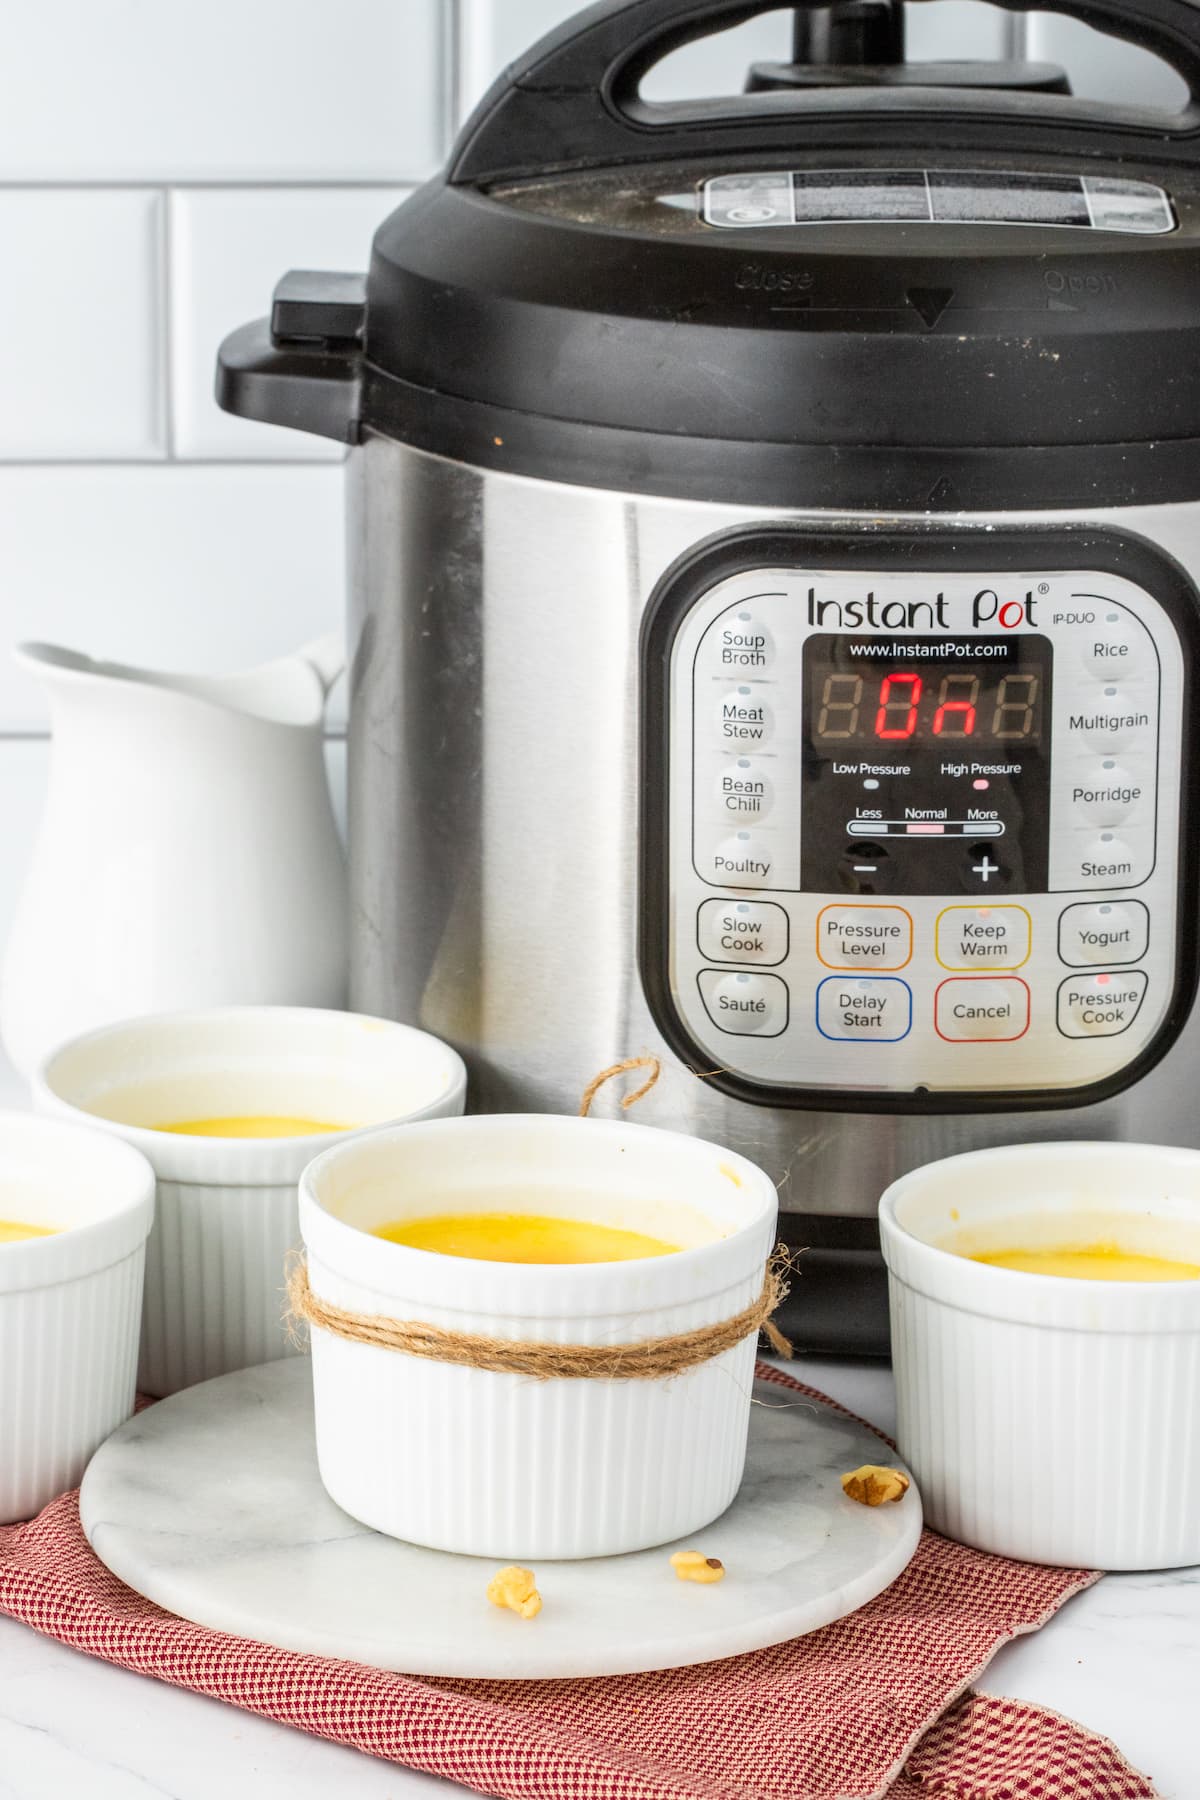 Creme Brûlée in small white ramekins with a twine rope tied around the cups in front of an Instant Pot